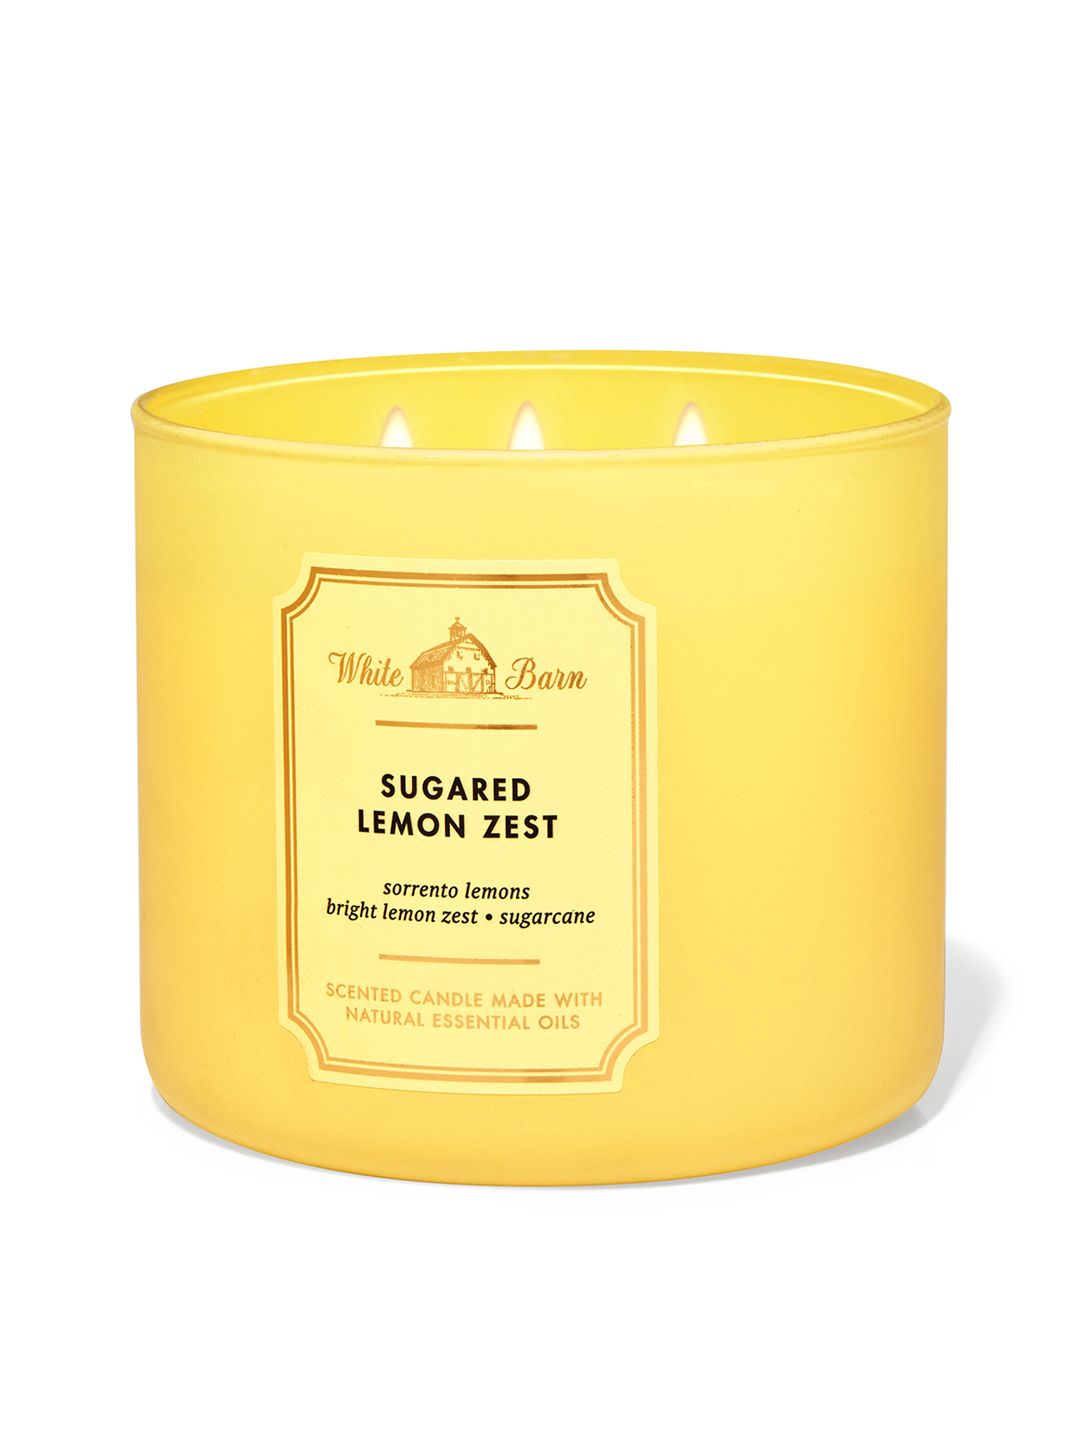 Bath & Body Works Sugared Lemon Zest 3-Wick Scented Candle - 411g Price in India